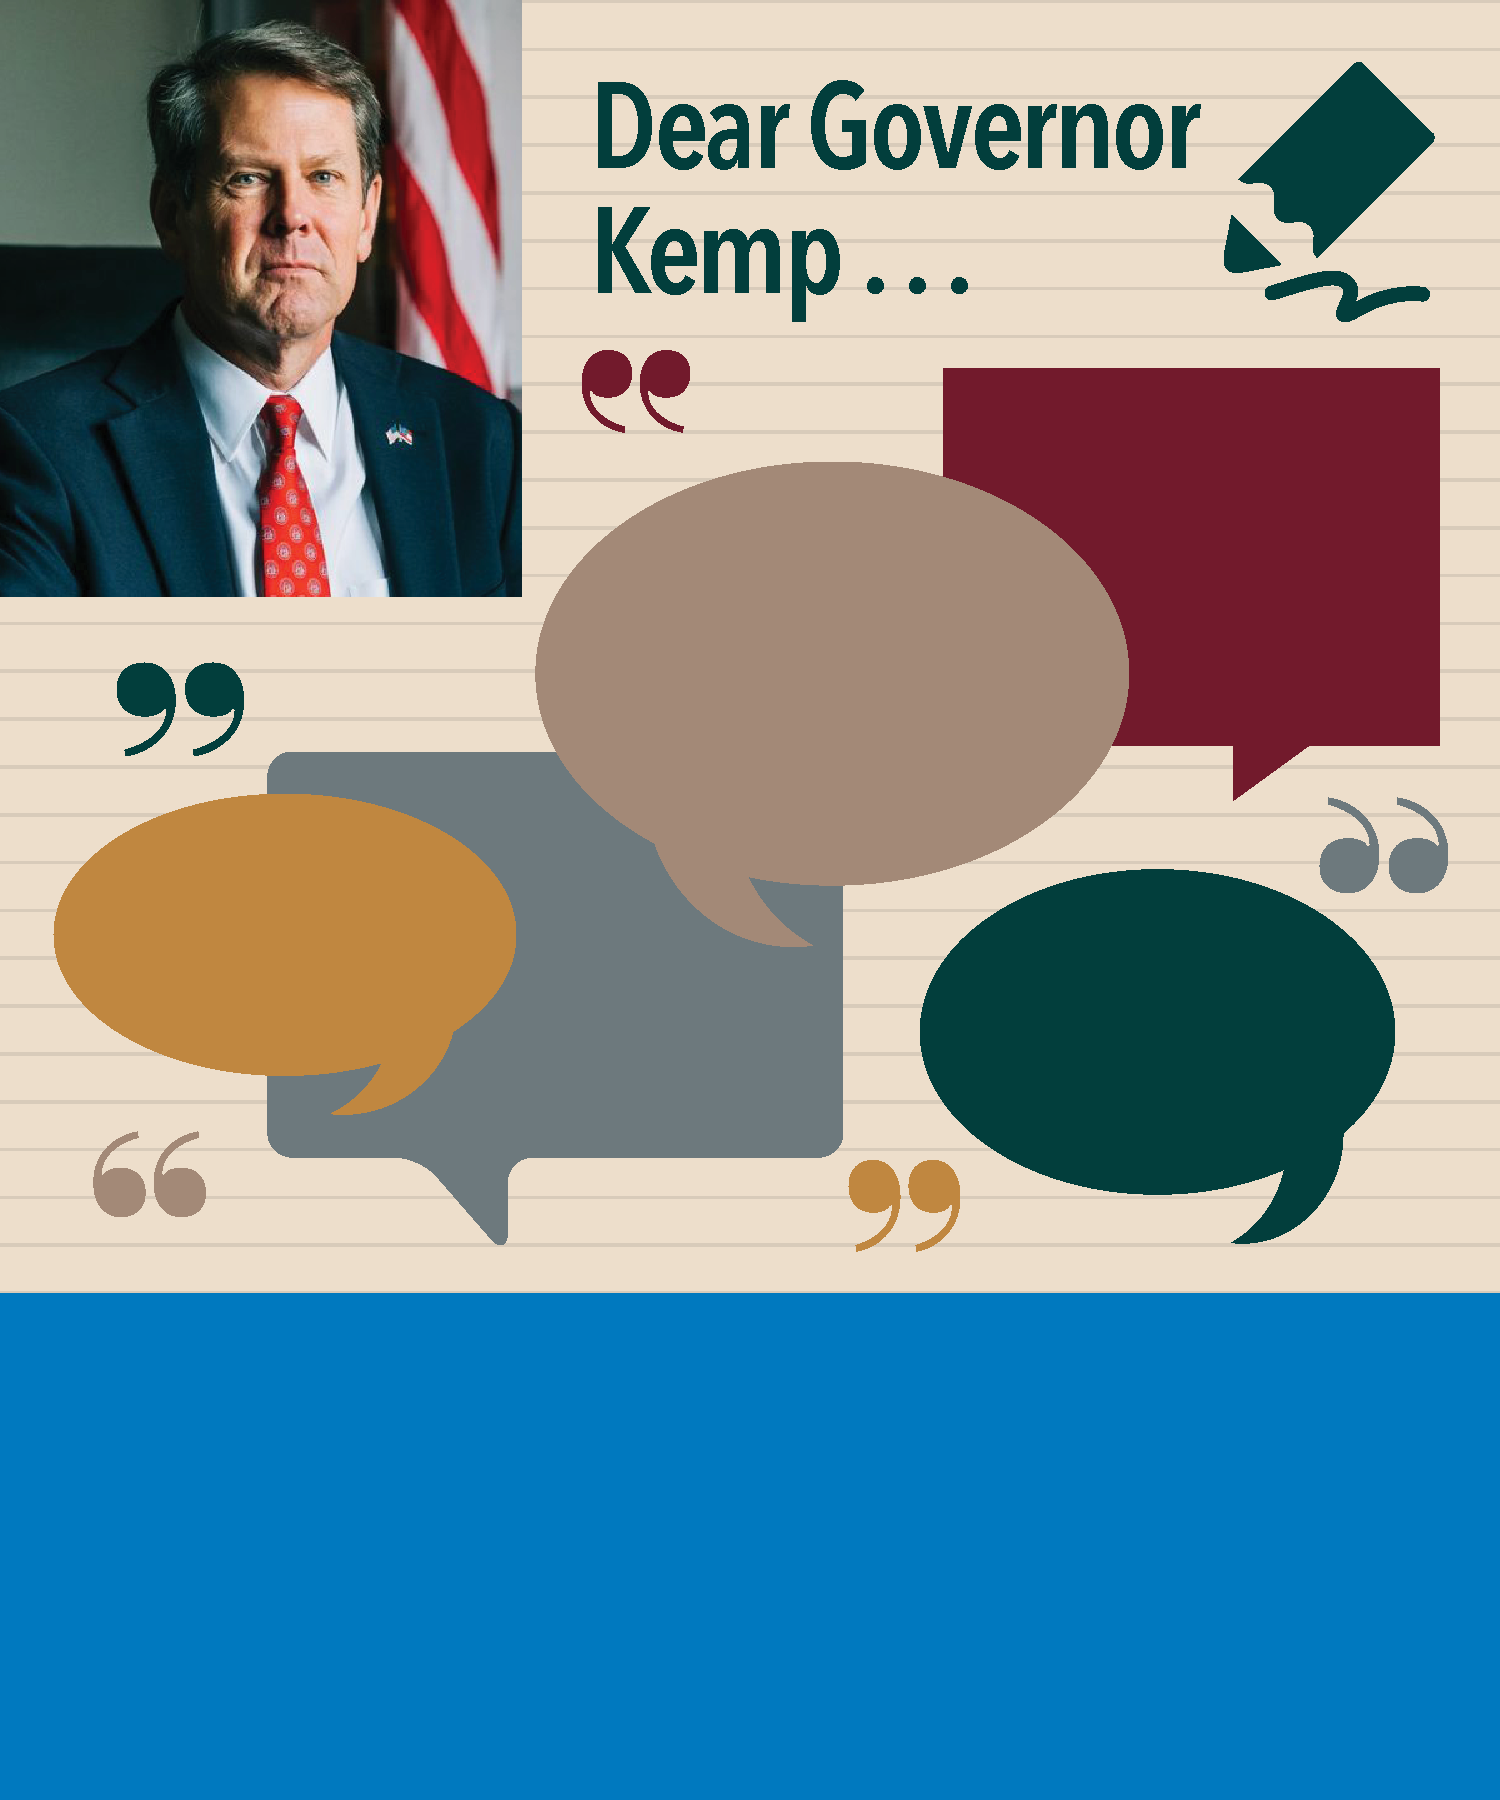 In November 2018, Georgia elected Brian Kemp as its new governor, succeeding Nathan Deal. GCDD requested individuals across the state submit ideas and issues that they’d like the new administration to work on that affect individuals with disabilities in letters or emails addressed  “Dear Governor ...” Many responses were received and are included here.